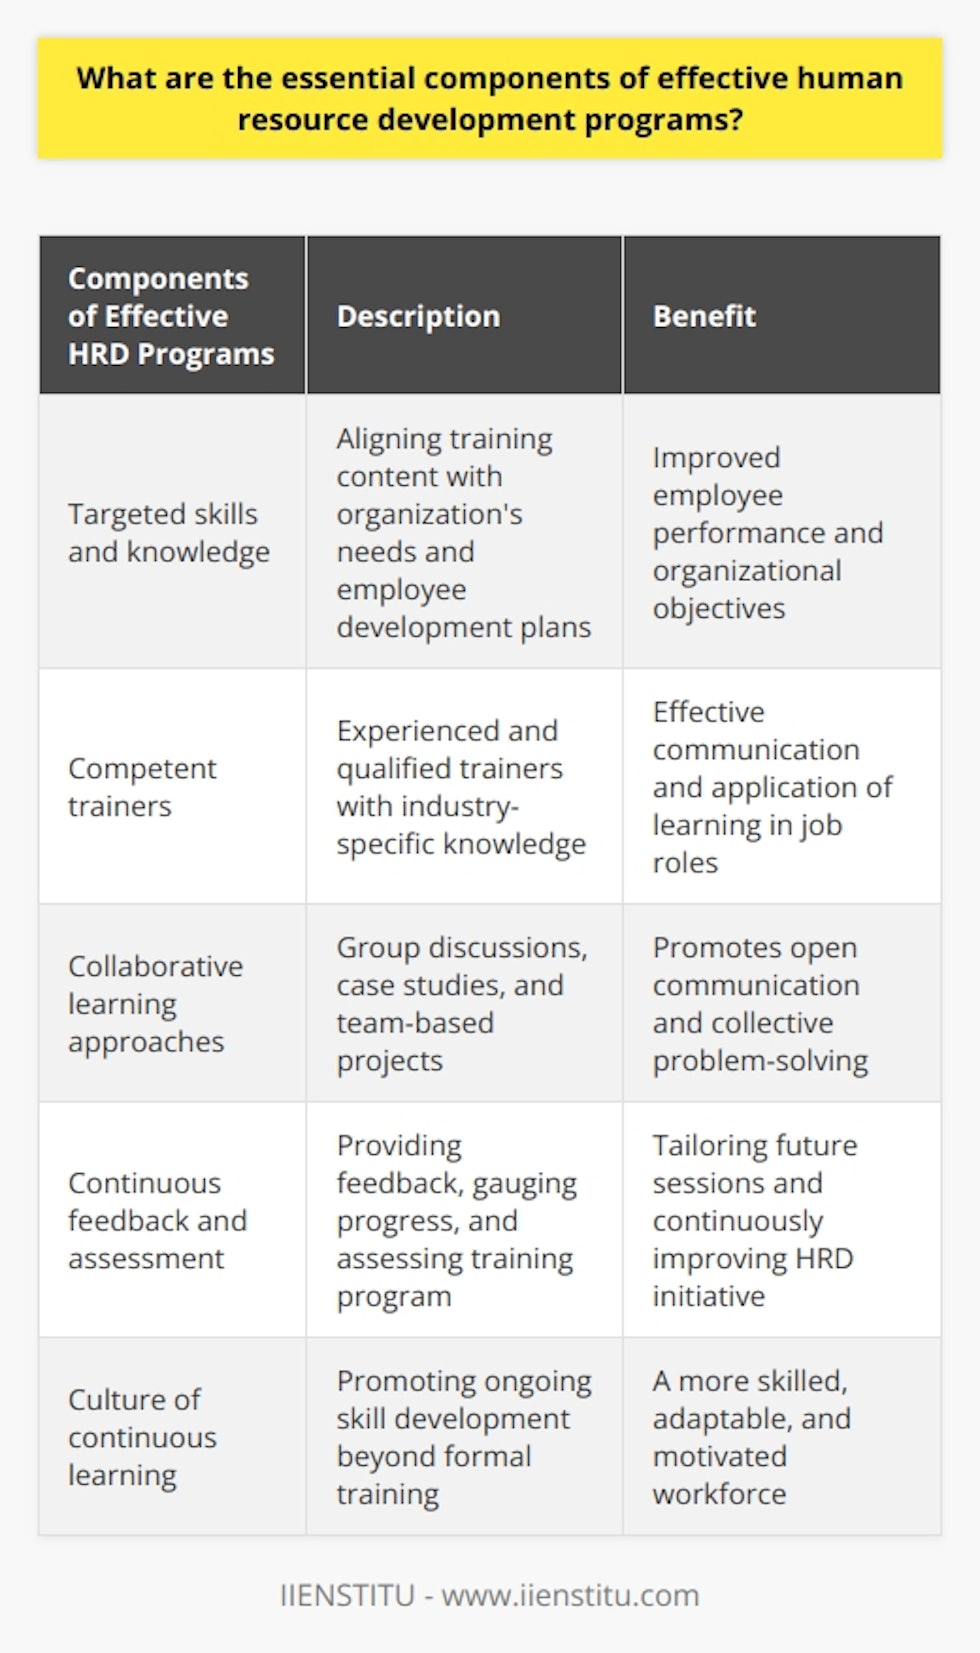 Effective human resource development programs require specific components to ensure their success. These components include targeted skills and knowledge, competent trainers, collaborative learning approaches, continuous feedback and assessment, and a culture of continuous learning.Firstly, an effective HRD program focuses on developing targeted skills and knowledge areas that are relevant to the organization's needs. This involves aligning the training content with the company's strategic goals and the individual employee's development plan. By targeting specific areas, the program becomes more effective in meeting organizational objectives and improving employee performance.Secondly, competent trainers are essential for the success of HRD programs. These trainers should have the necessary experience, qualifications, and industry-specific knowledge to effectively communicate the required information. Competent trainers enable participants to acquire relevant and applicable knowledge, increasing their ability to apply what they have learned in their roles.Thirdly, incorporating collaborative learning approaches is crucial in HRD programs. These approaches facilitate group discussions, case studies, and team-based projects, promoting open communication and collective problem-solving. Collaborative learning enhances participant engagement and retention of new information, leading to more successful outcomes in terms of knowledge acquisition and skill development.Continuous feedback and assessment are also vital components of effective HRD programs. This involves providing feedback on participants' performance, gauging their progress, and assessing the overall success of the training program. Gathering feedback allows program managers to tailor future training sessions and continuously improve the HRD initiative to ensure its effectiveness.Finally, cultivating a culture of continuous learning is crucial for the long-term success of HRD programs. This environment encourages employees to seek further opportunities for skill development, even after the formal training has ended. By promoting continuous learning, organizations benefit from a more skilled, adaptable, and motivated workforce that can contribute to achieving strategic goals.In conclusion, effective HRD programs consist of targeted skills and knowledge, competent trainers, collaborative learning approaches, continuous feedback and assessment, and a culture of continuous learning. These components work together to ensure the success of HRD initiatives, enabling organizations to cultivate a skilled and capable workforce that can contribute to their strategic goals and overall success.